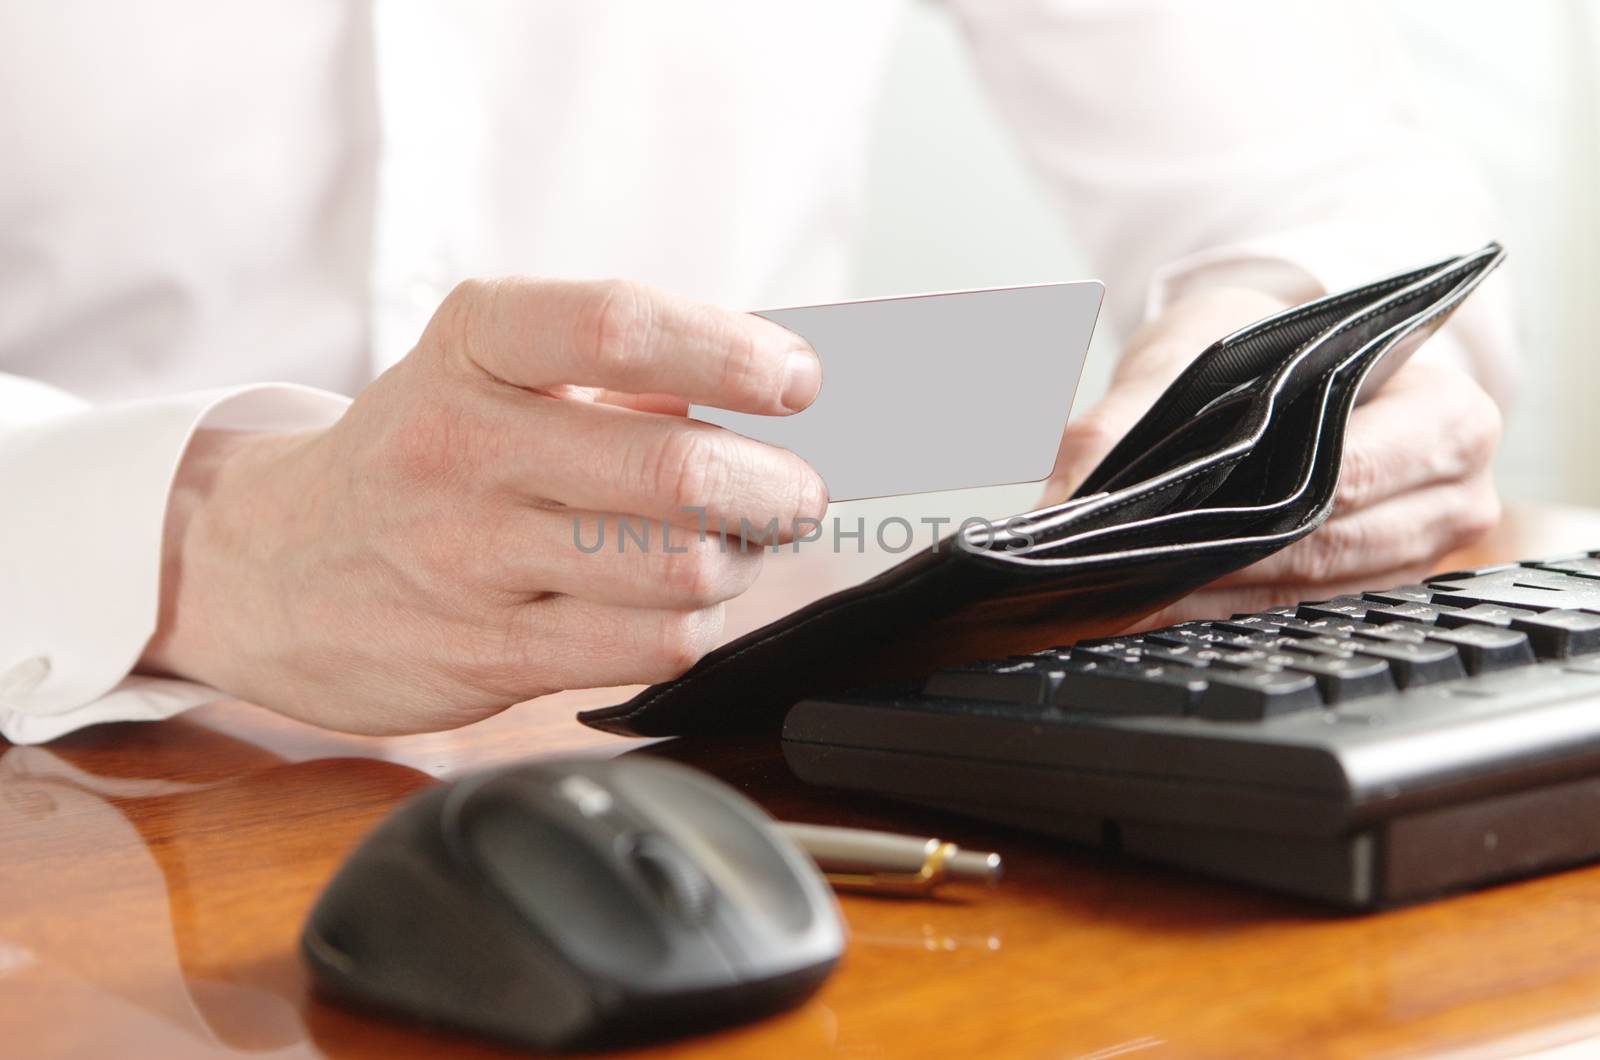 Hands of businessman with purse and bank card on the computer keyboard by Ravenestling